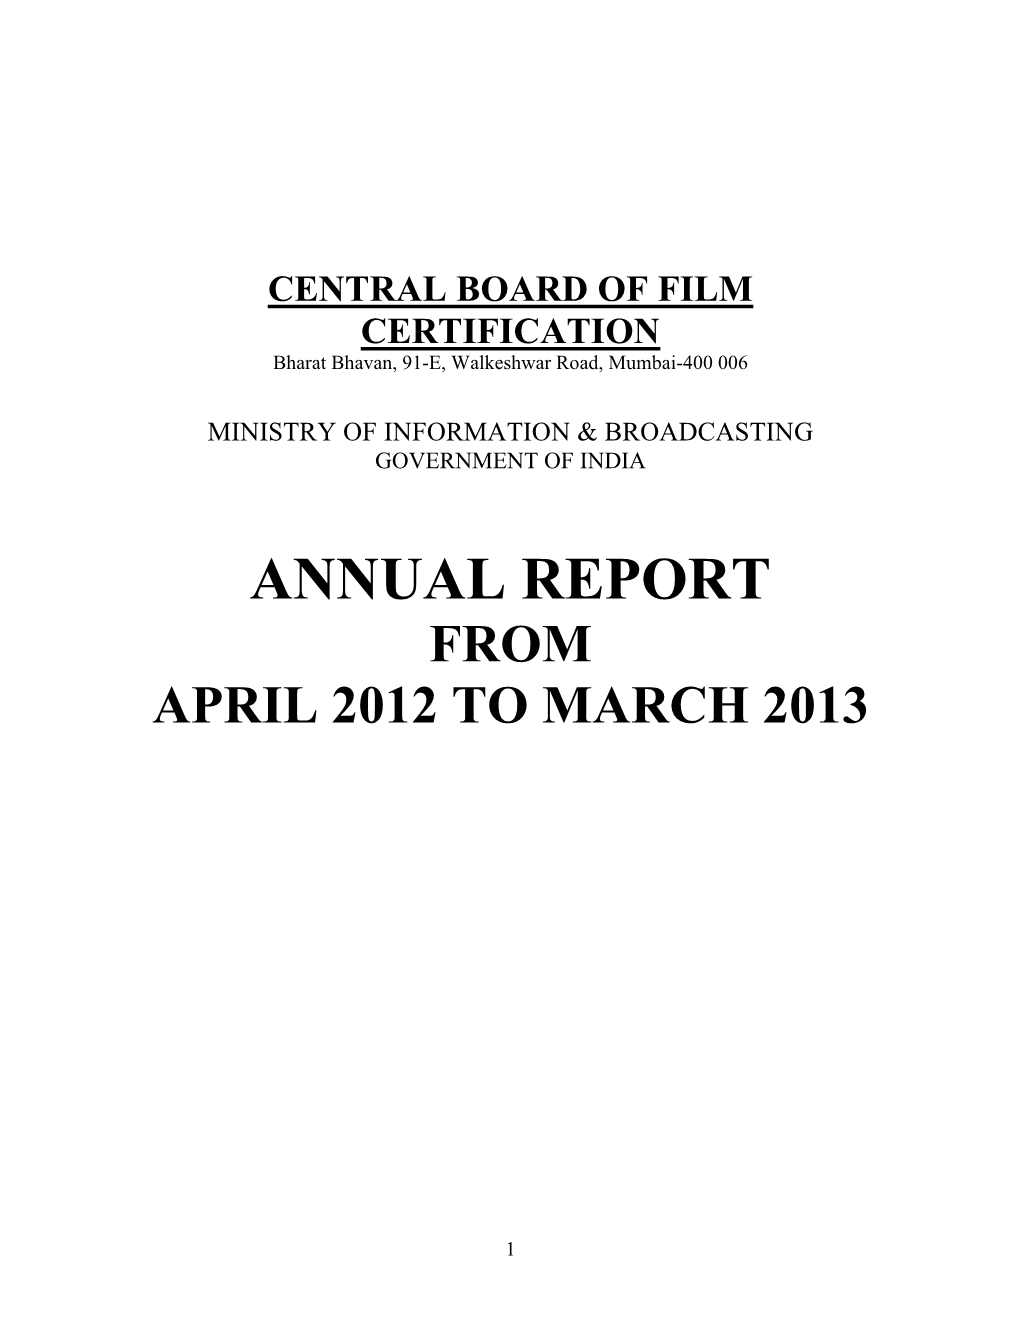 Annual Report from April 2012 to March 2013